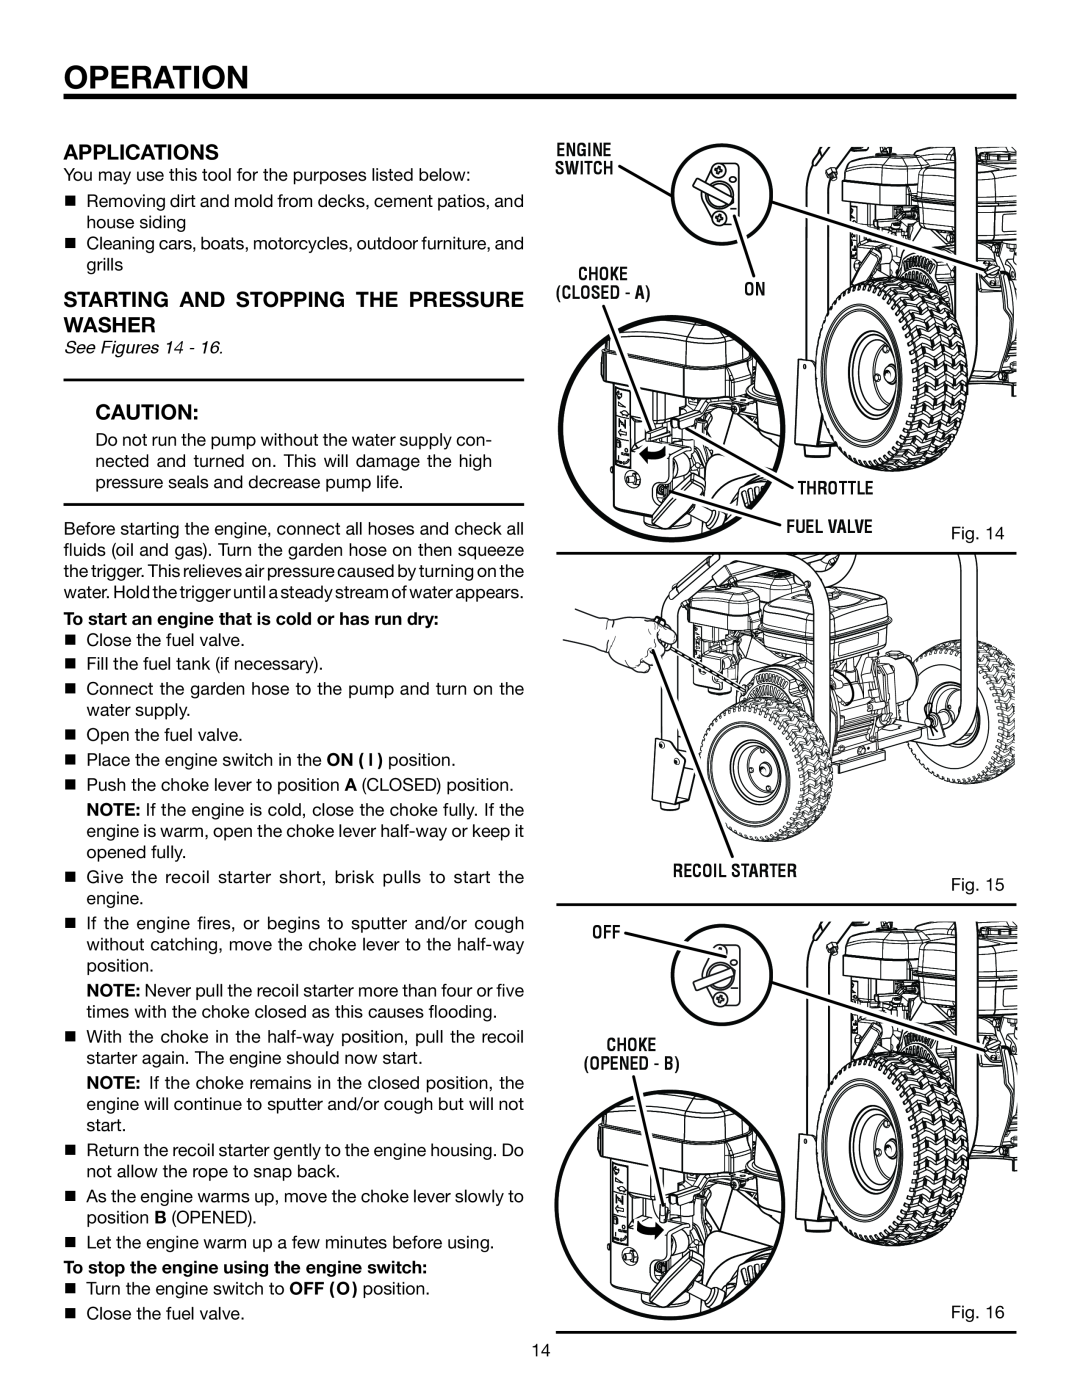 RIDGID RD80763 Applications, starting and stopping the pressure washer, See Figures 14, off choke opened - b, Operation 